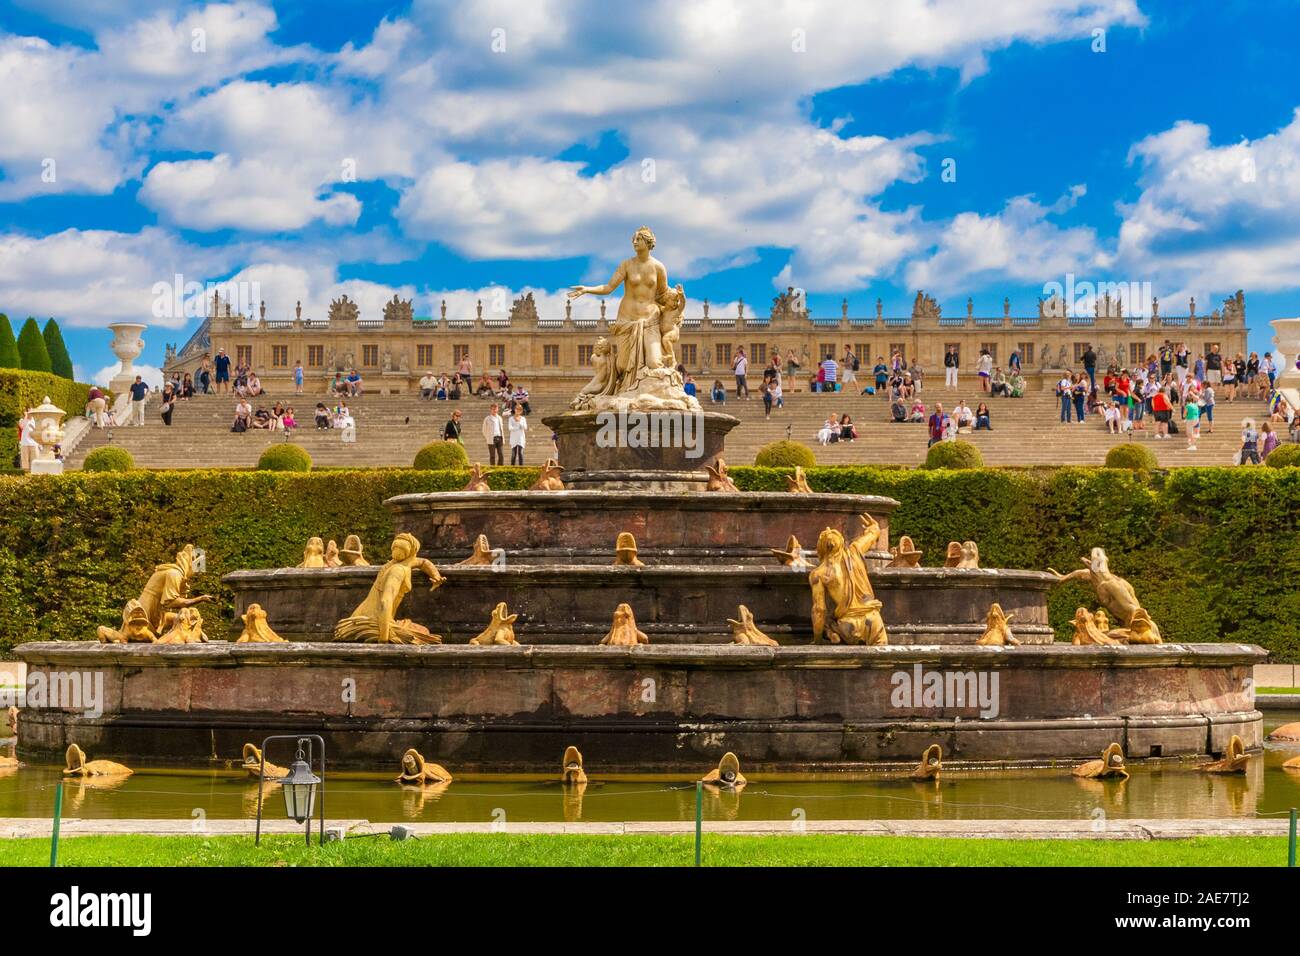 Perfect close-up view of the Latona Fountain (Bassin de Latone) in the Gardens of Versailles with the Palace in the background. On the top tier is a... Stock Photo